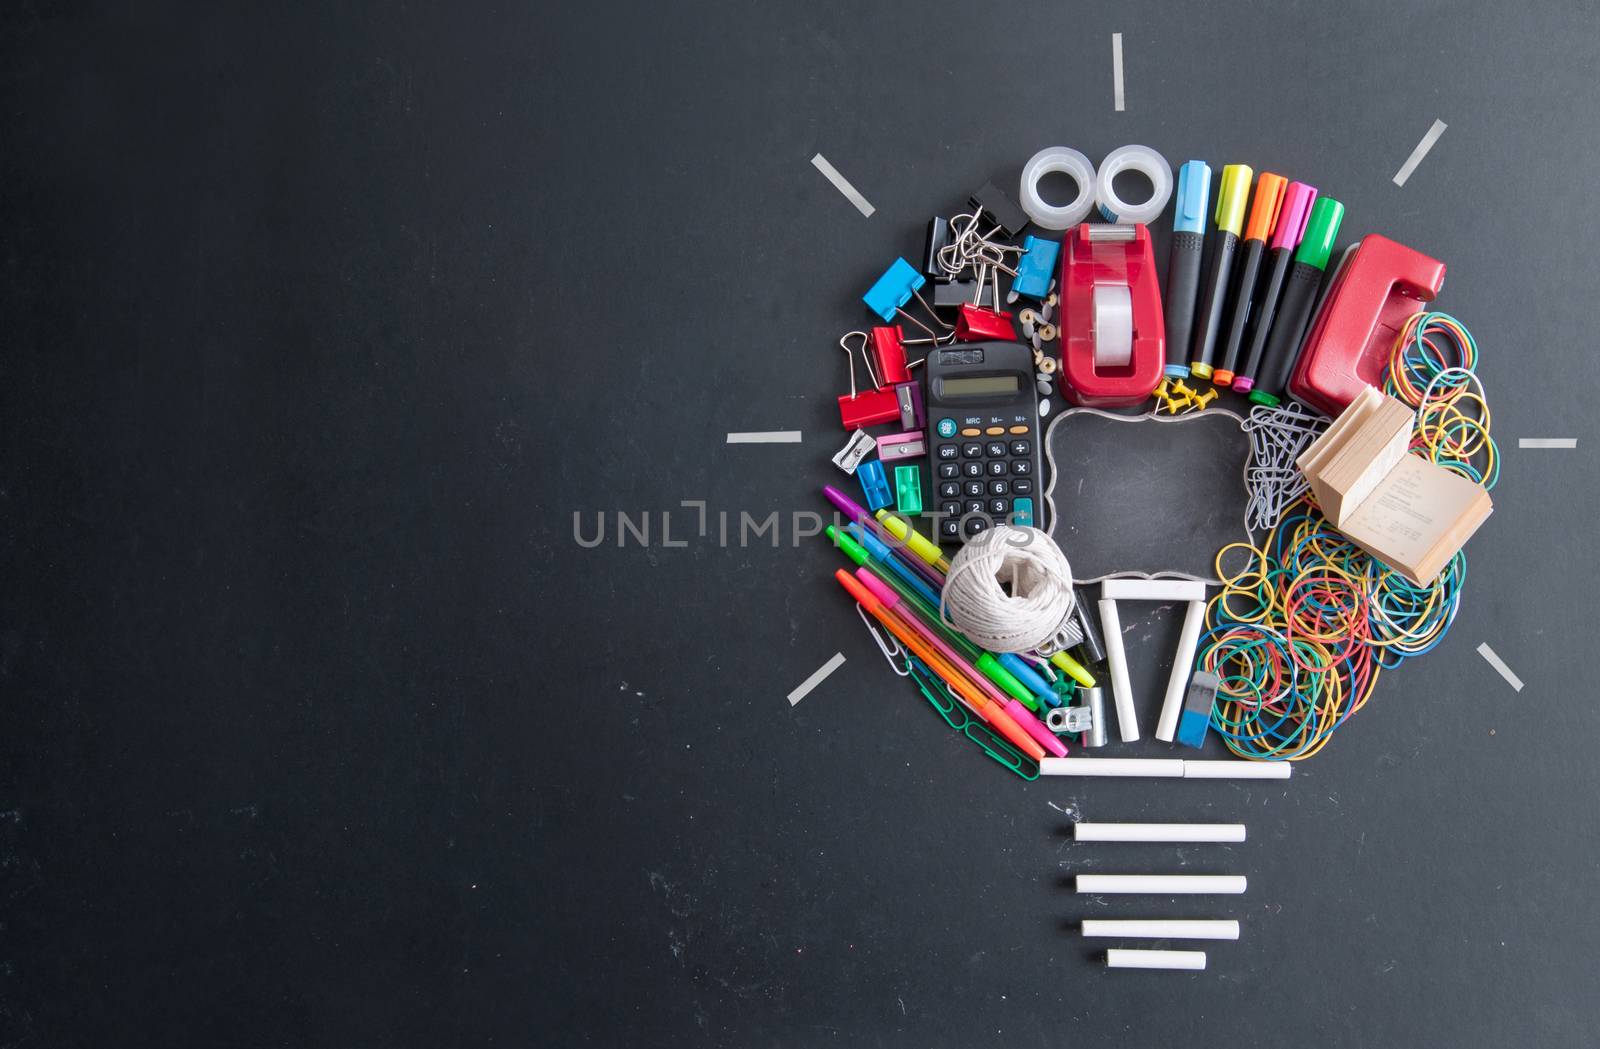 Light bulb icon made from stationery by unikpix